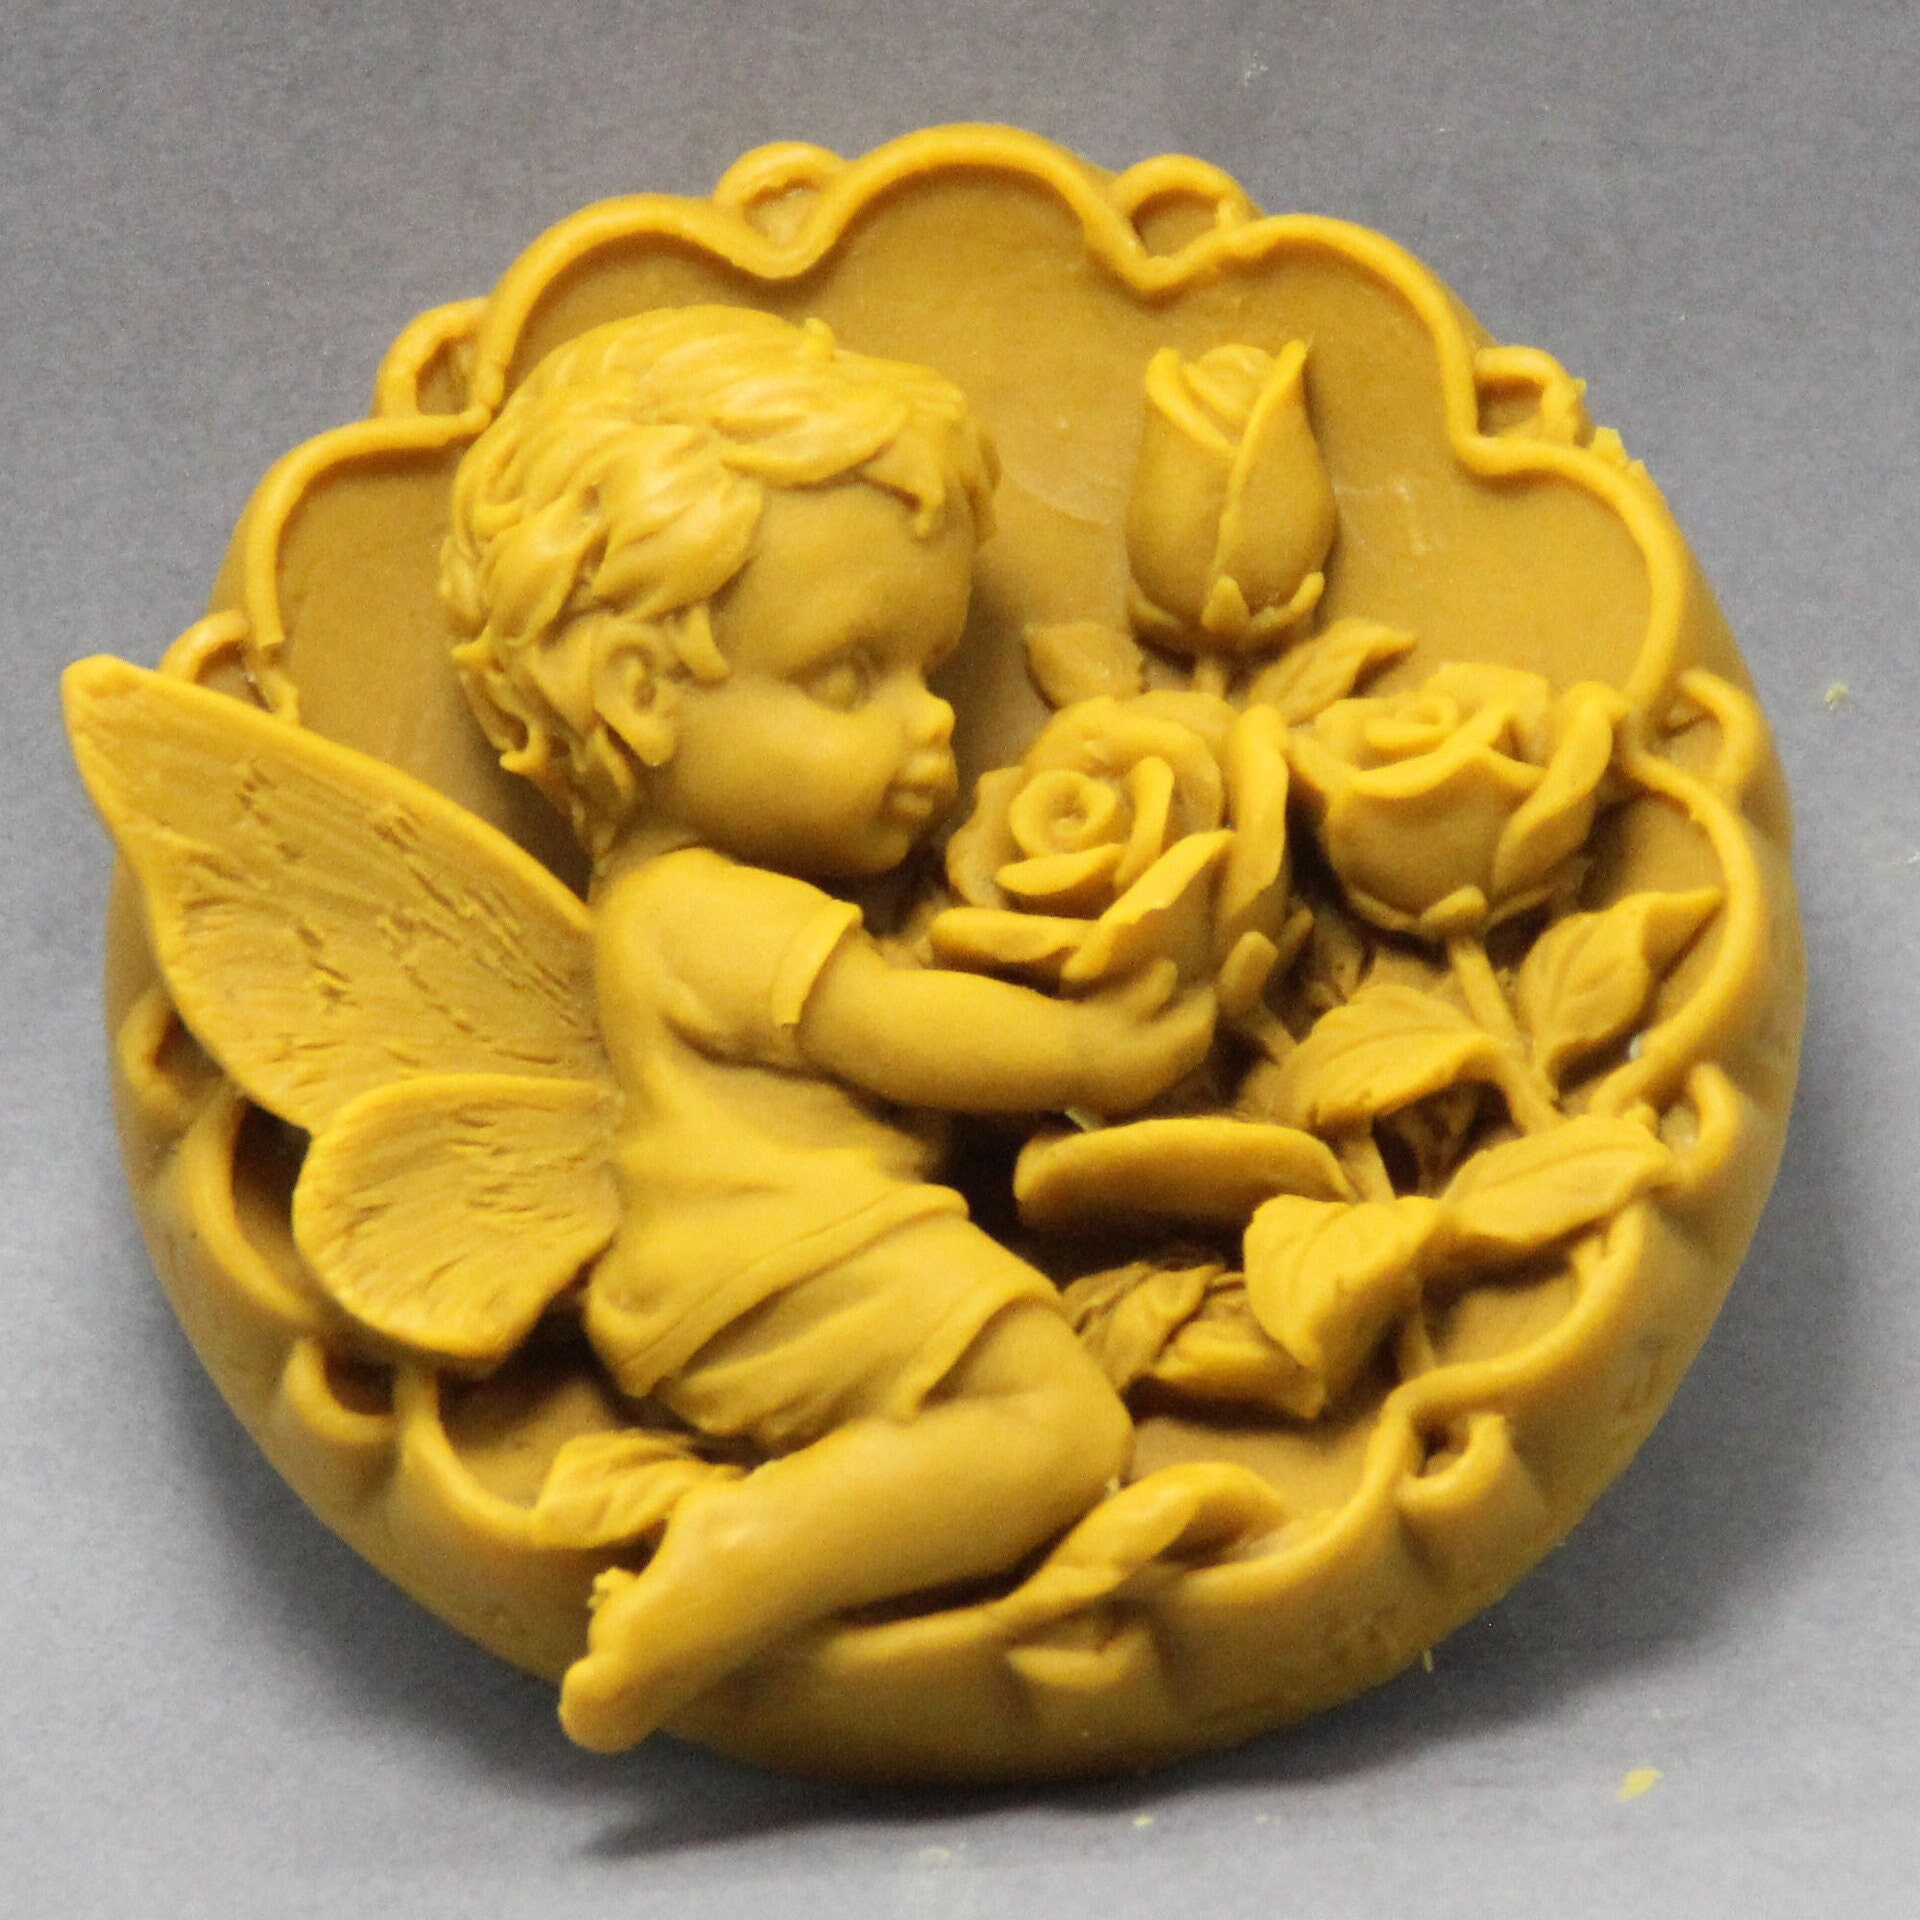 Lovely Baby Silicone Soap Mold 6 Cavities Baby Soap Mold Silicone